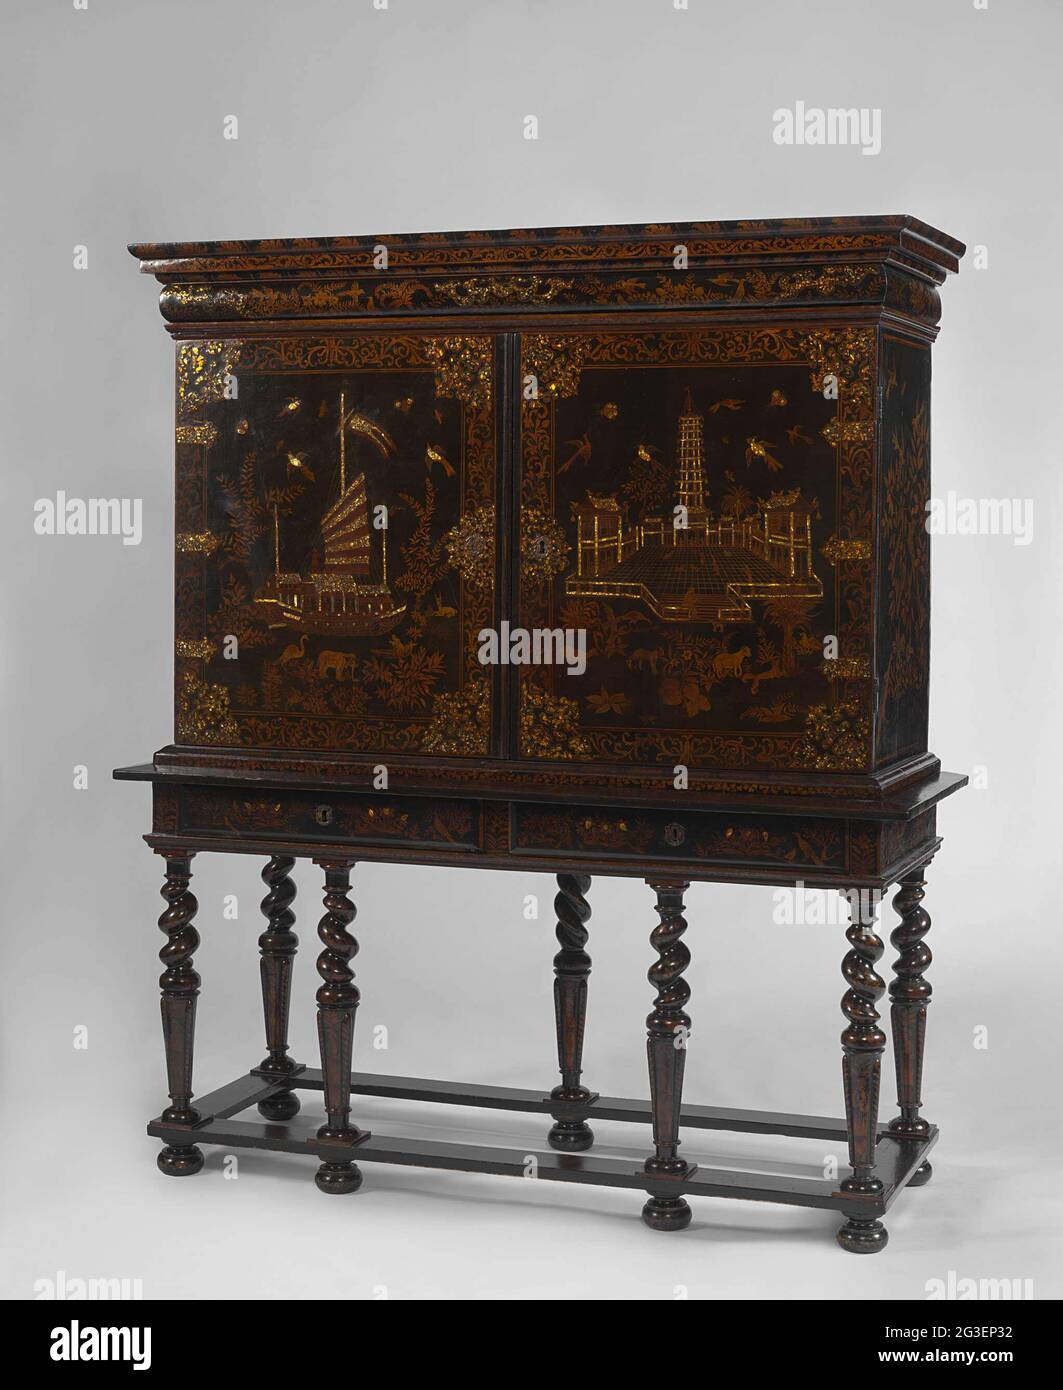 Cabinet on stand. All over Europe craftsmen tried to imitate Chinese and Japanese lacquer, but the essential ingredient, the resin from the so-called lacquer tree, could not be obtained outside East Asia. The scenes depicted on this cabinet – the ship and the tower with bells – are partly based on the earliest illustrated description of China published in Europe. Written by the Dutchman Joan Nieuhof, it was printed in Amsterdam in 1665. Stock Photo